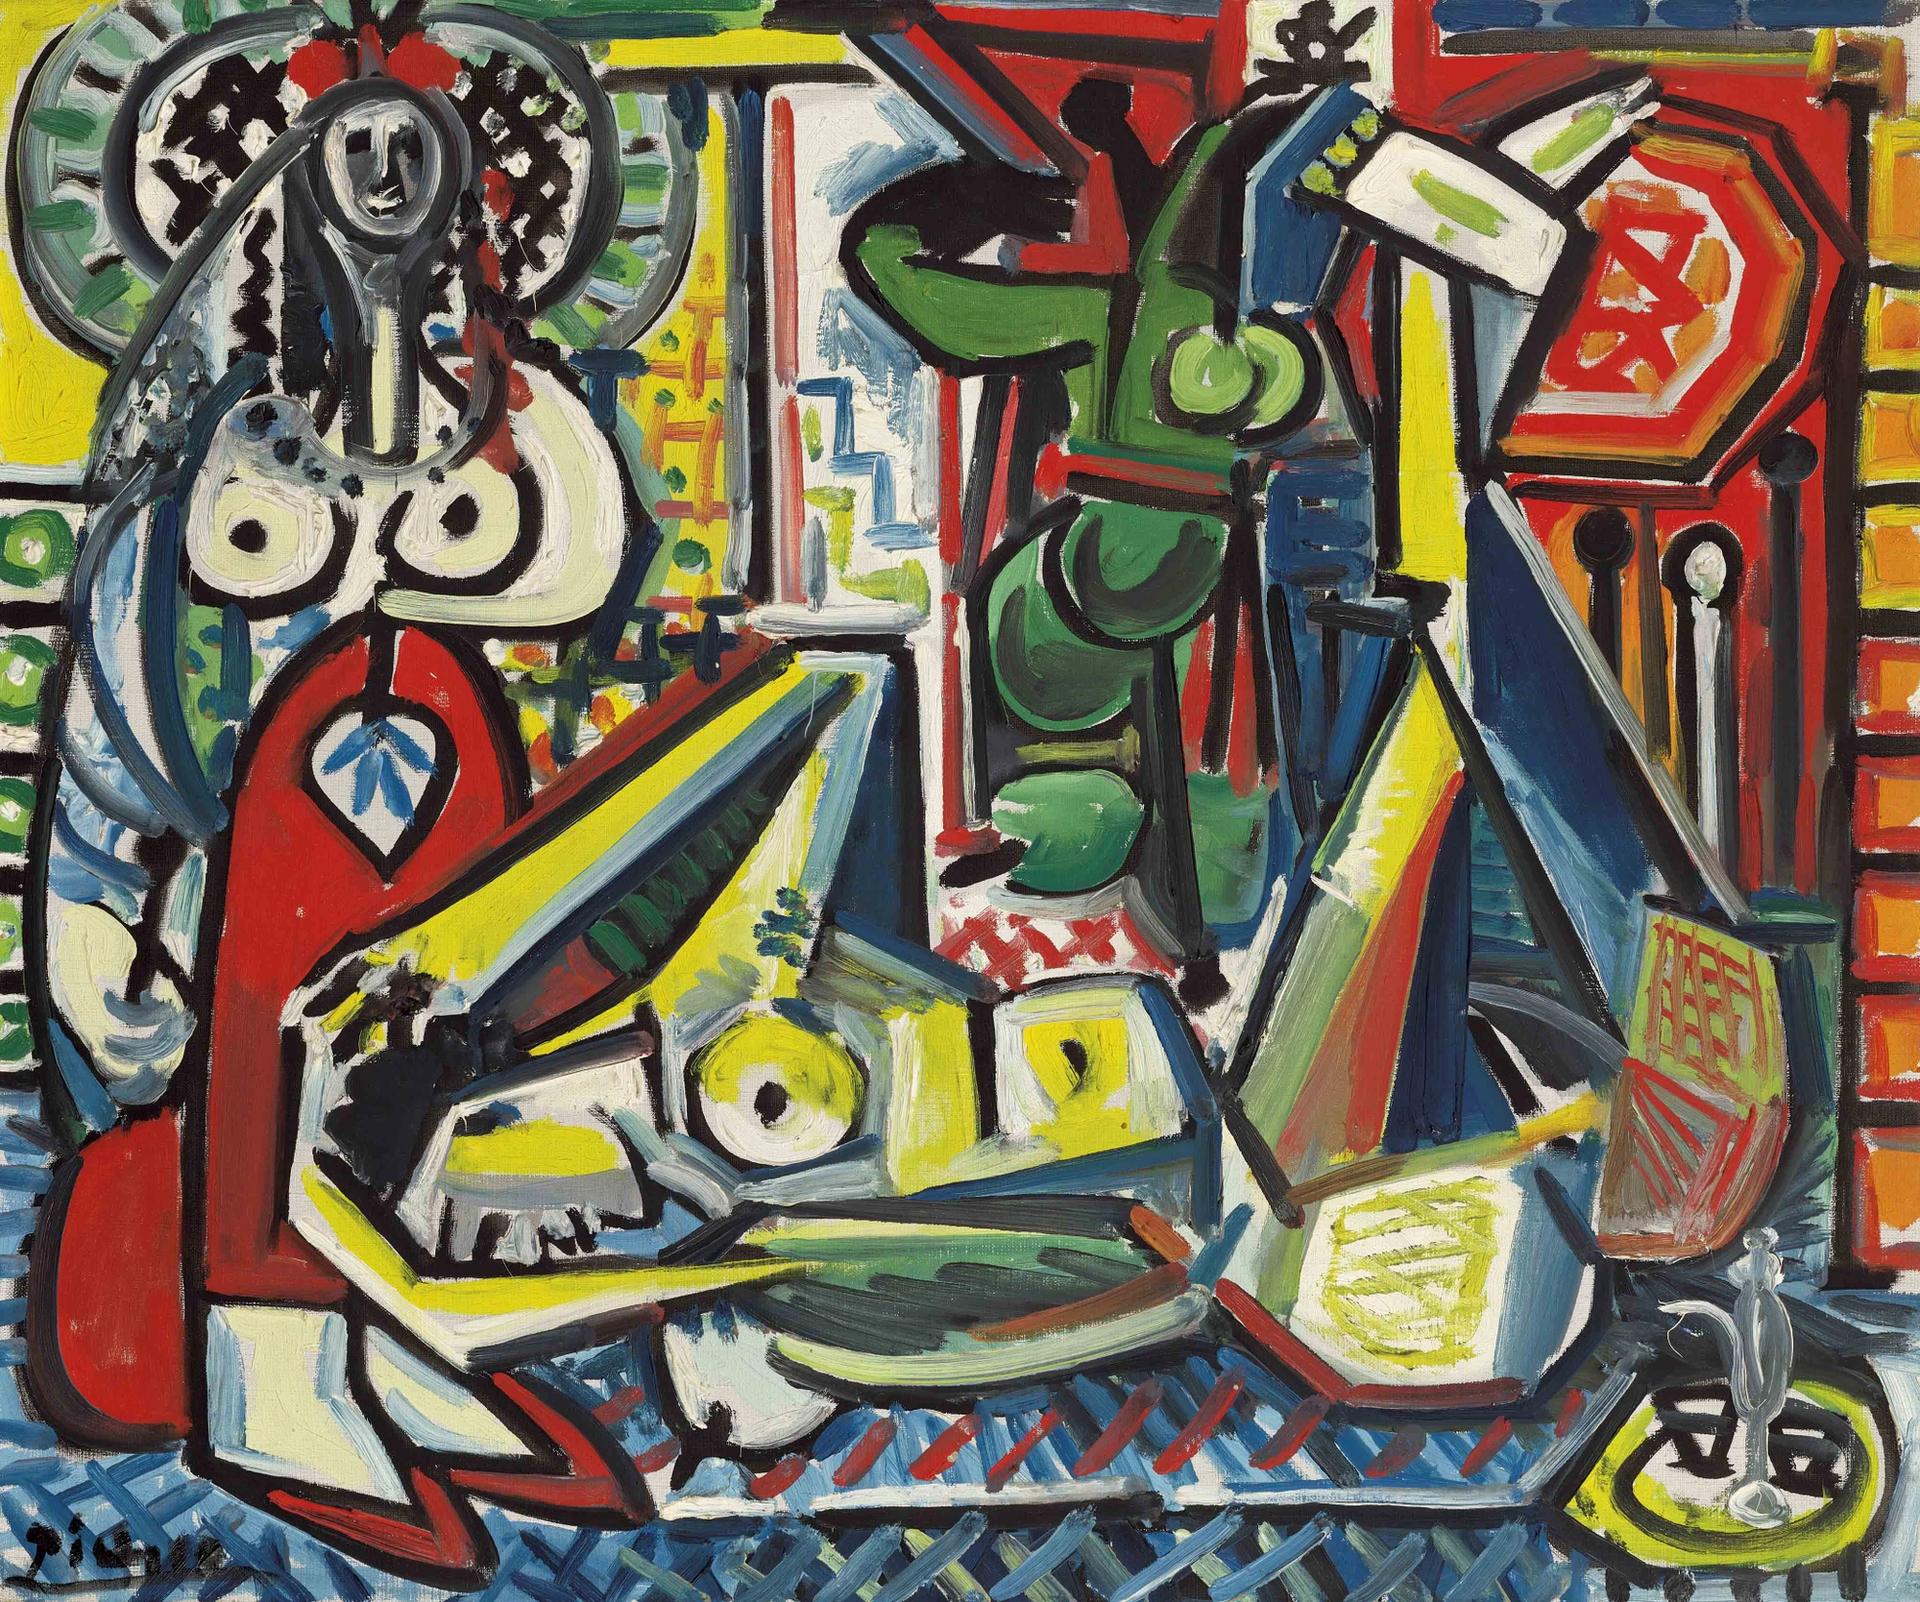 Picasso's Les femmes d'Alger (version 'F'), estimated in the region of $25m Courtesy of Christie's